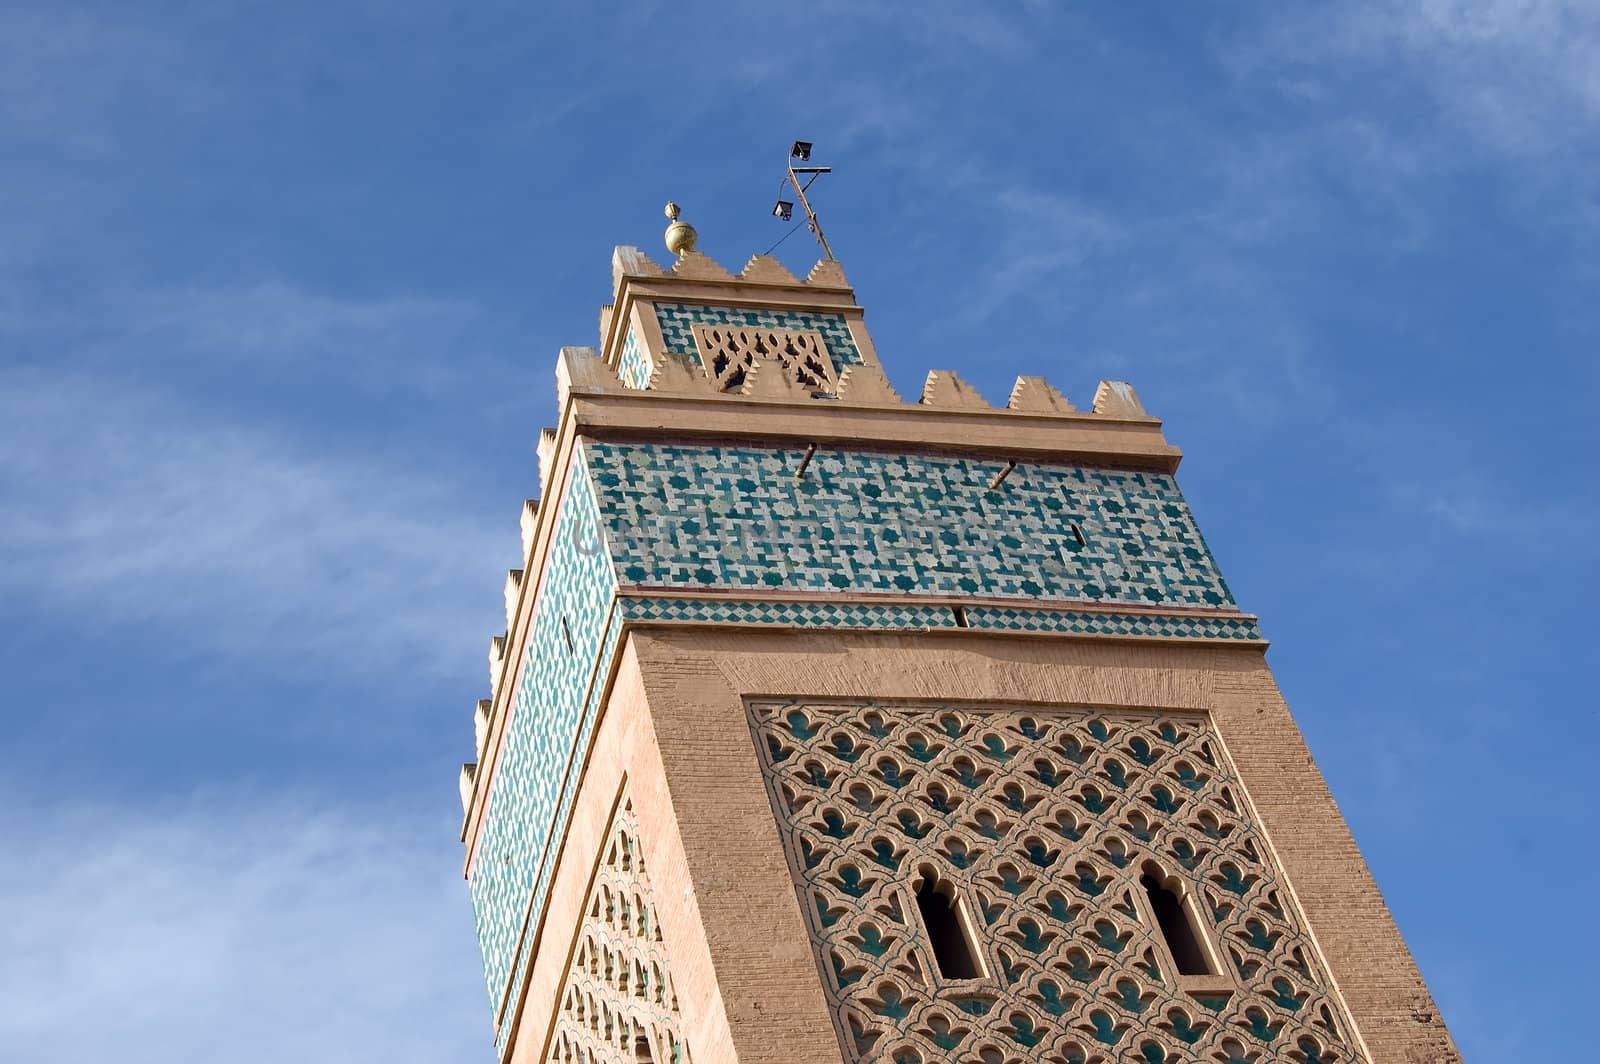 A Minaret detail of am mosque in the Marrakesh center, Morocco